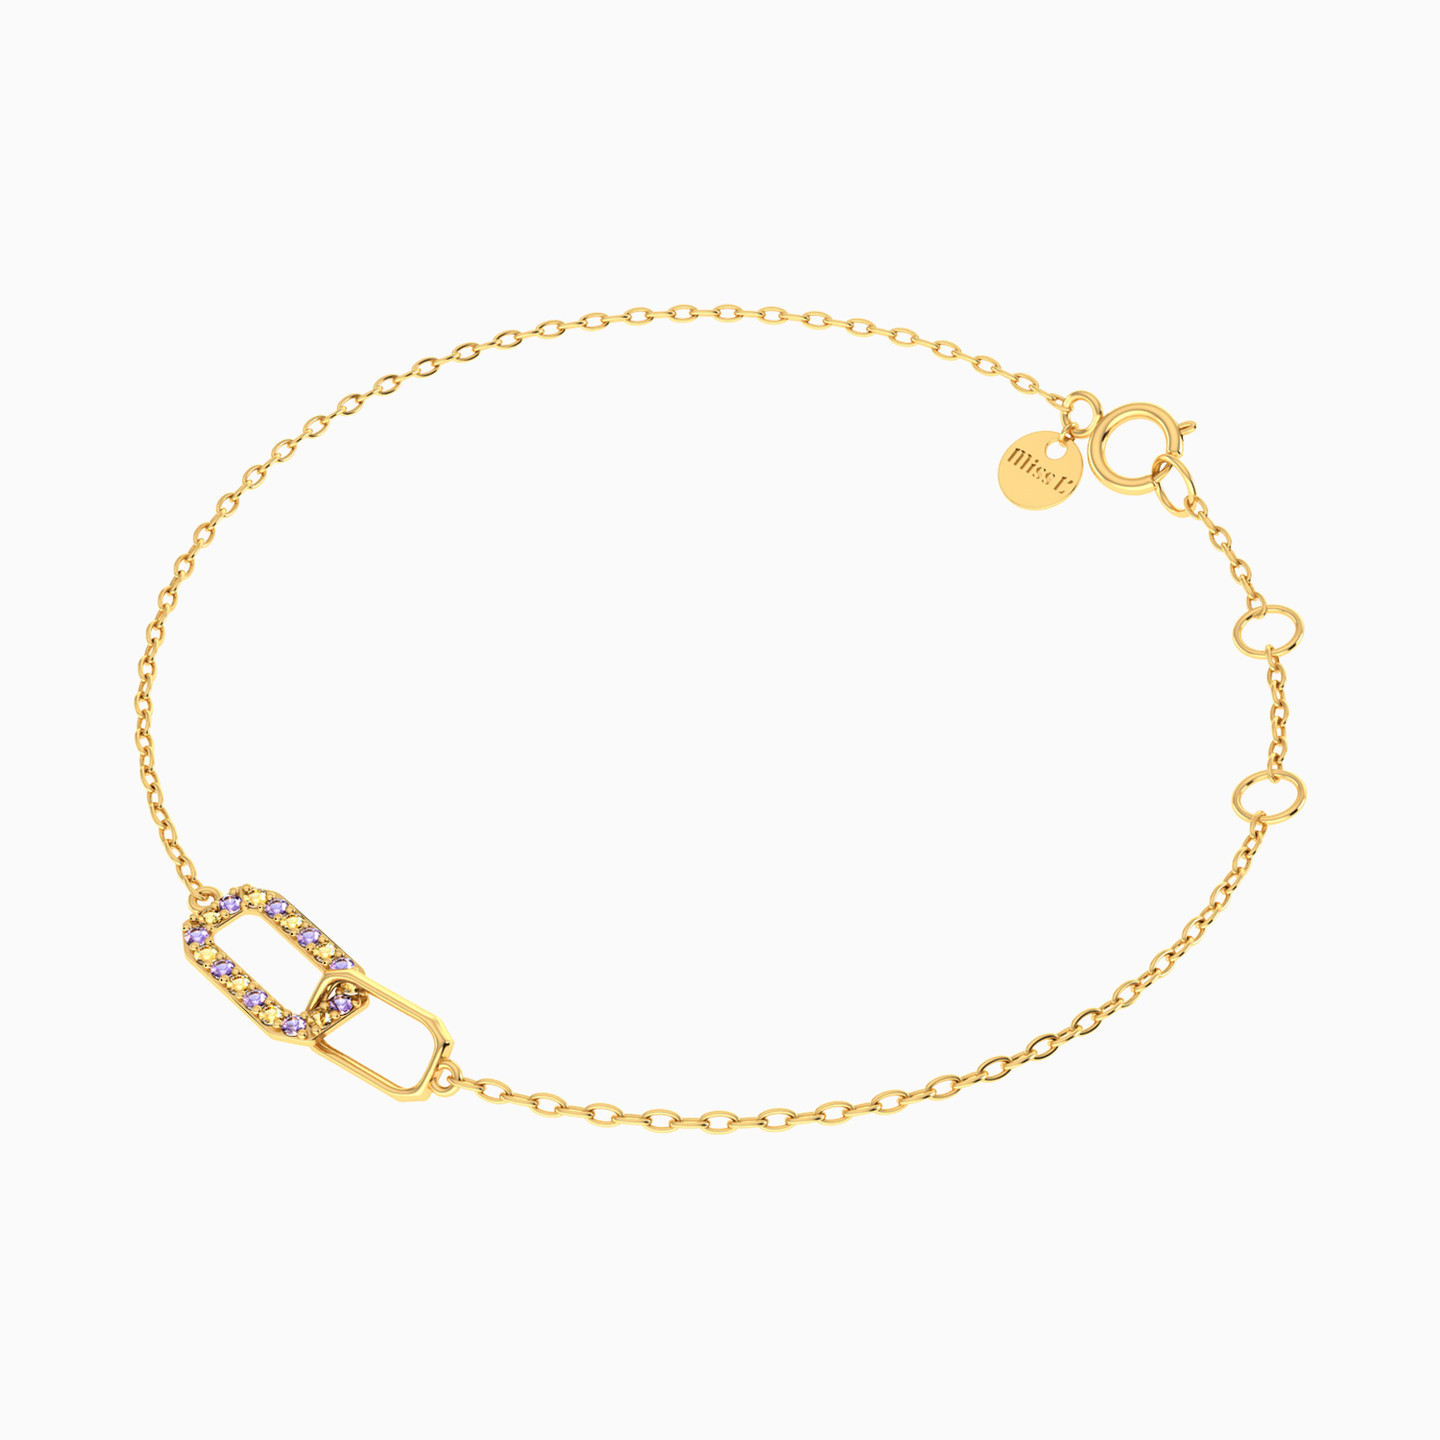 Rectangle Shaped Colored Stones Chain Bracelet in 18K Gold - 2